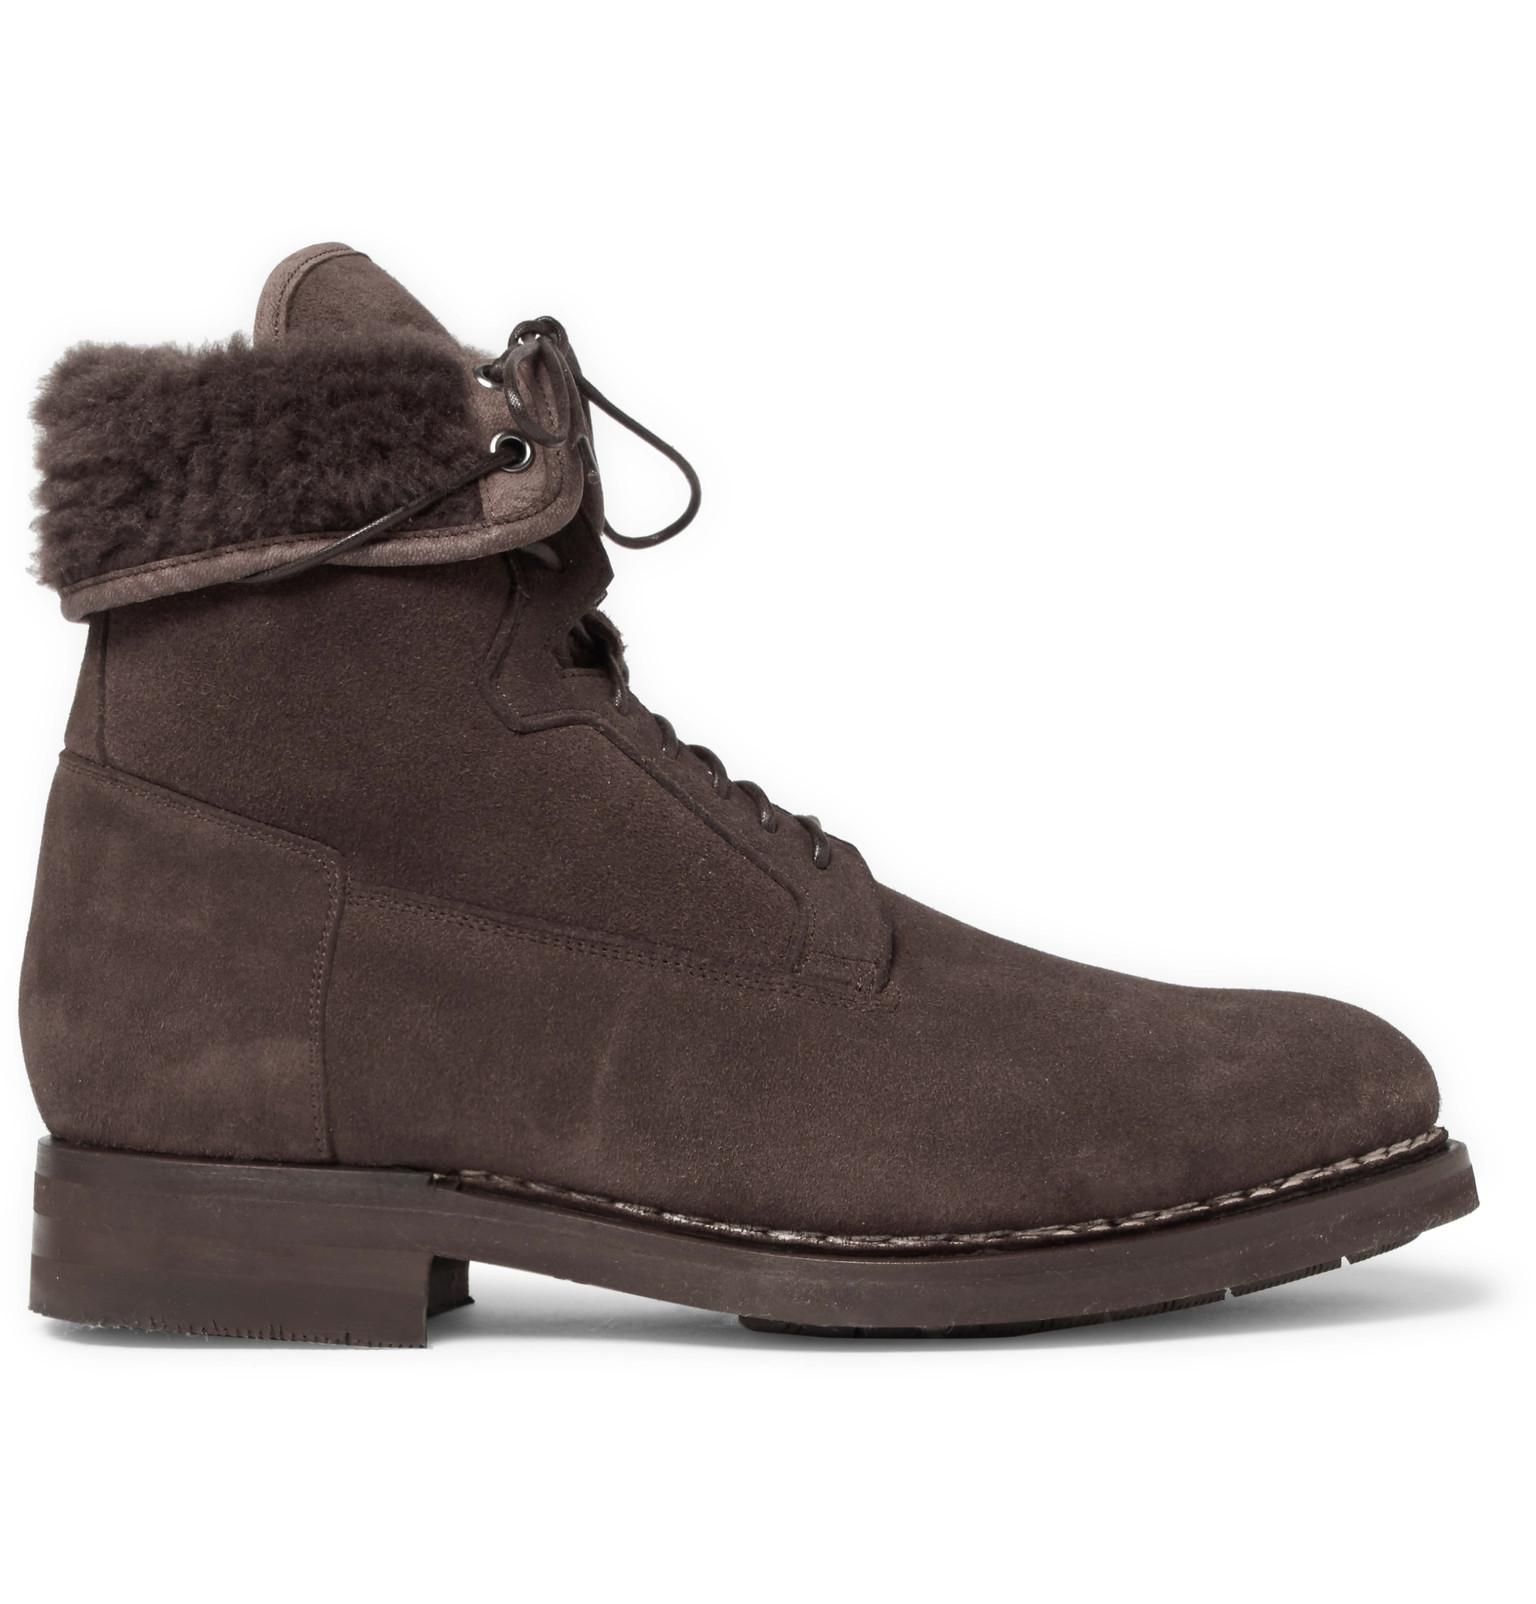 Santoni Shearling-lined Suede Boots in Brown for Men - Lyst